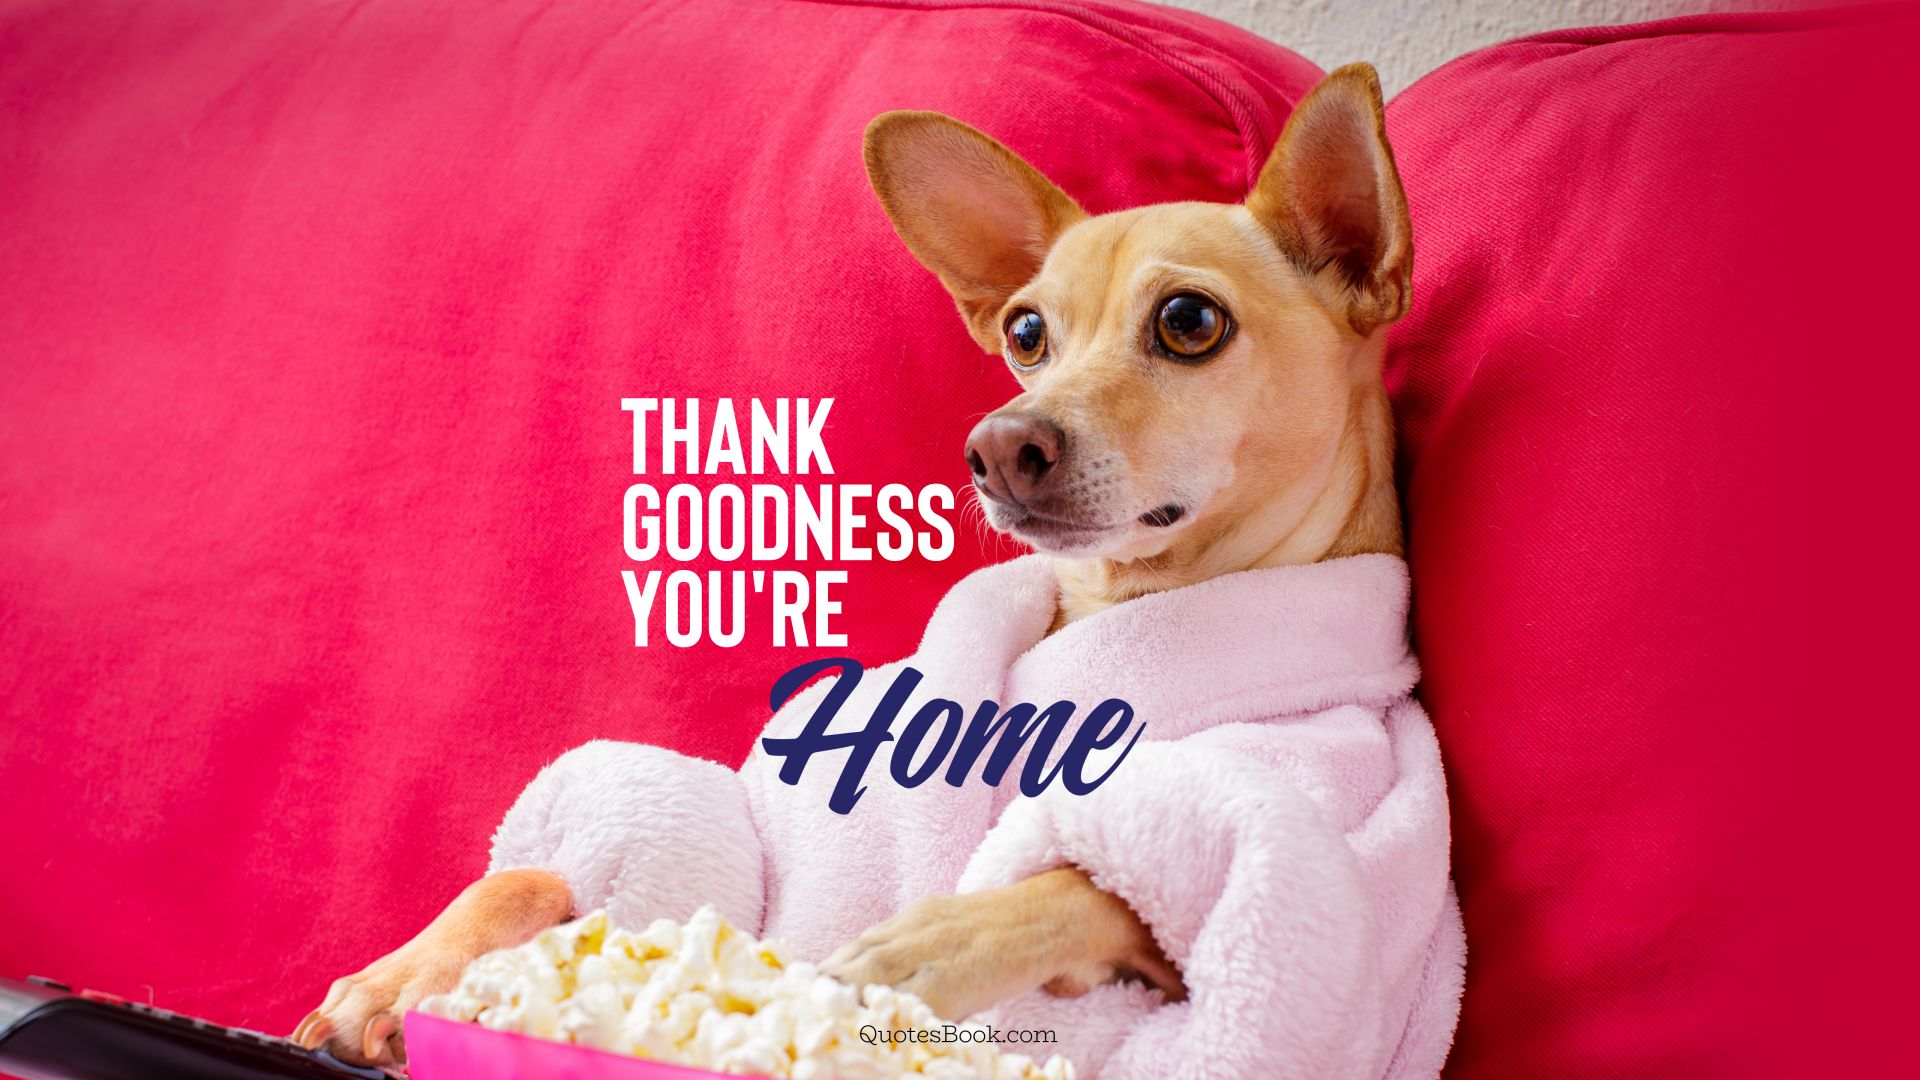 Thank goodness you're home